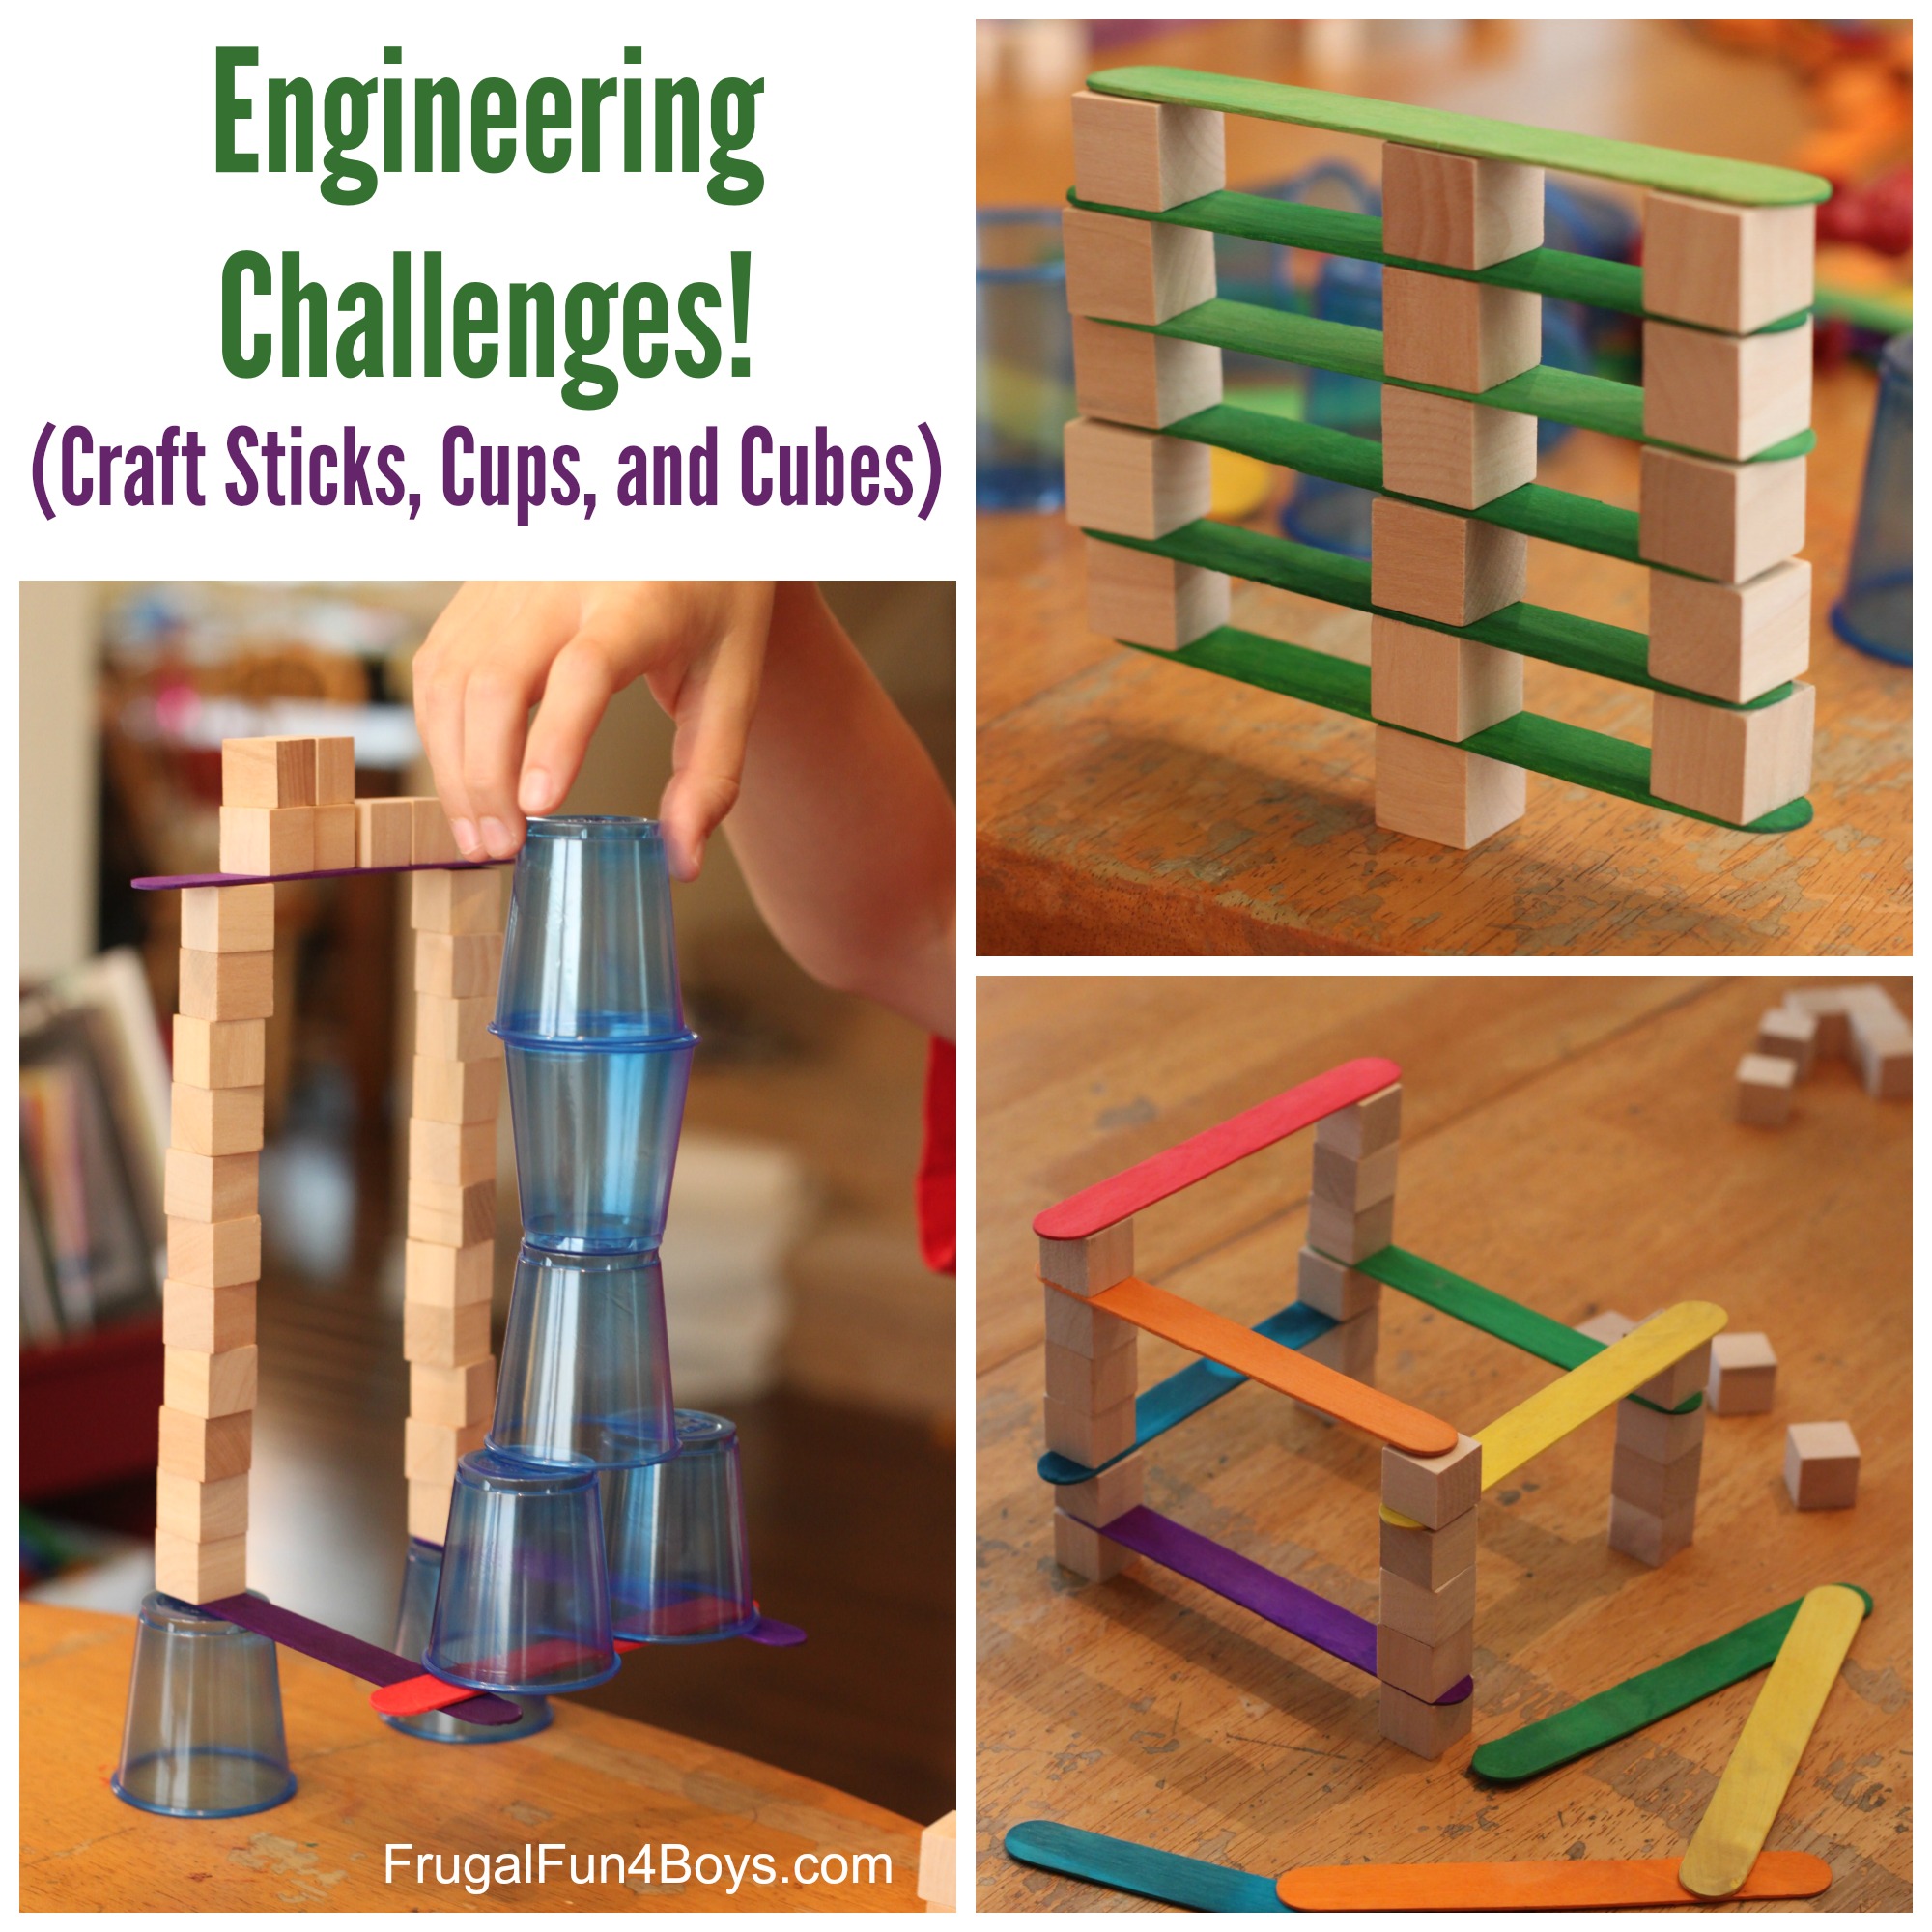 4 Engineering Challenges for Kids - Craft Sticks, Plastic Cups, and Wooden Cubes